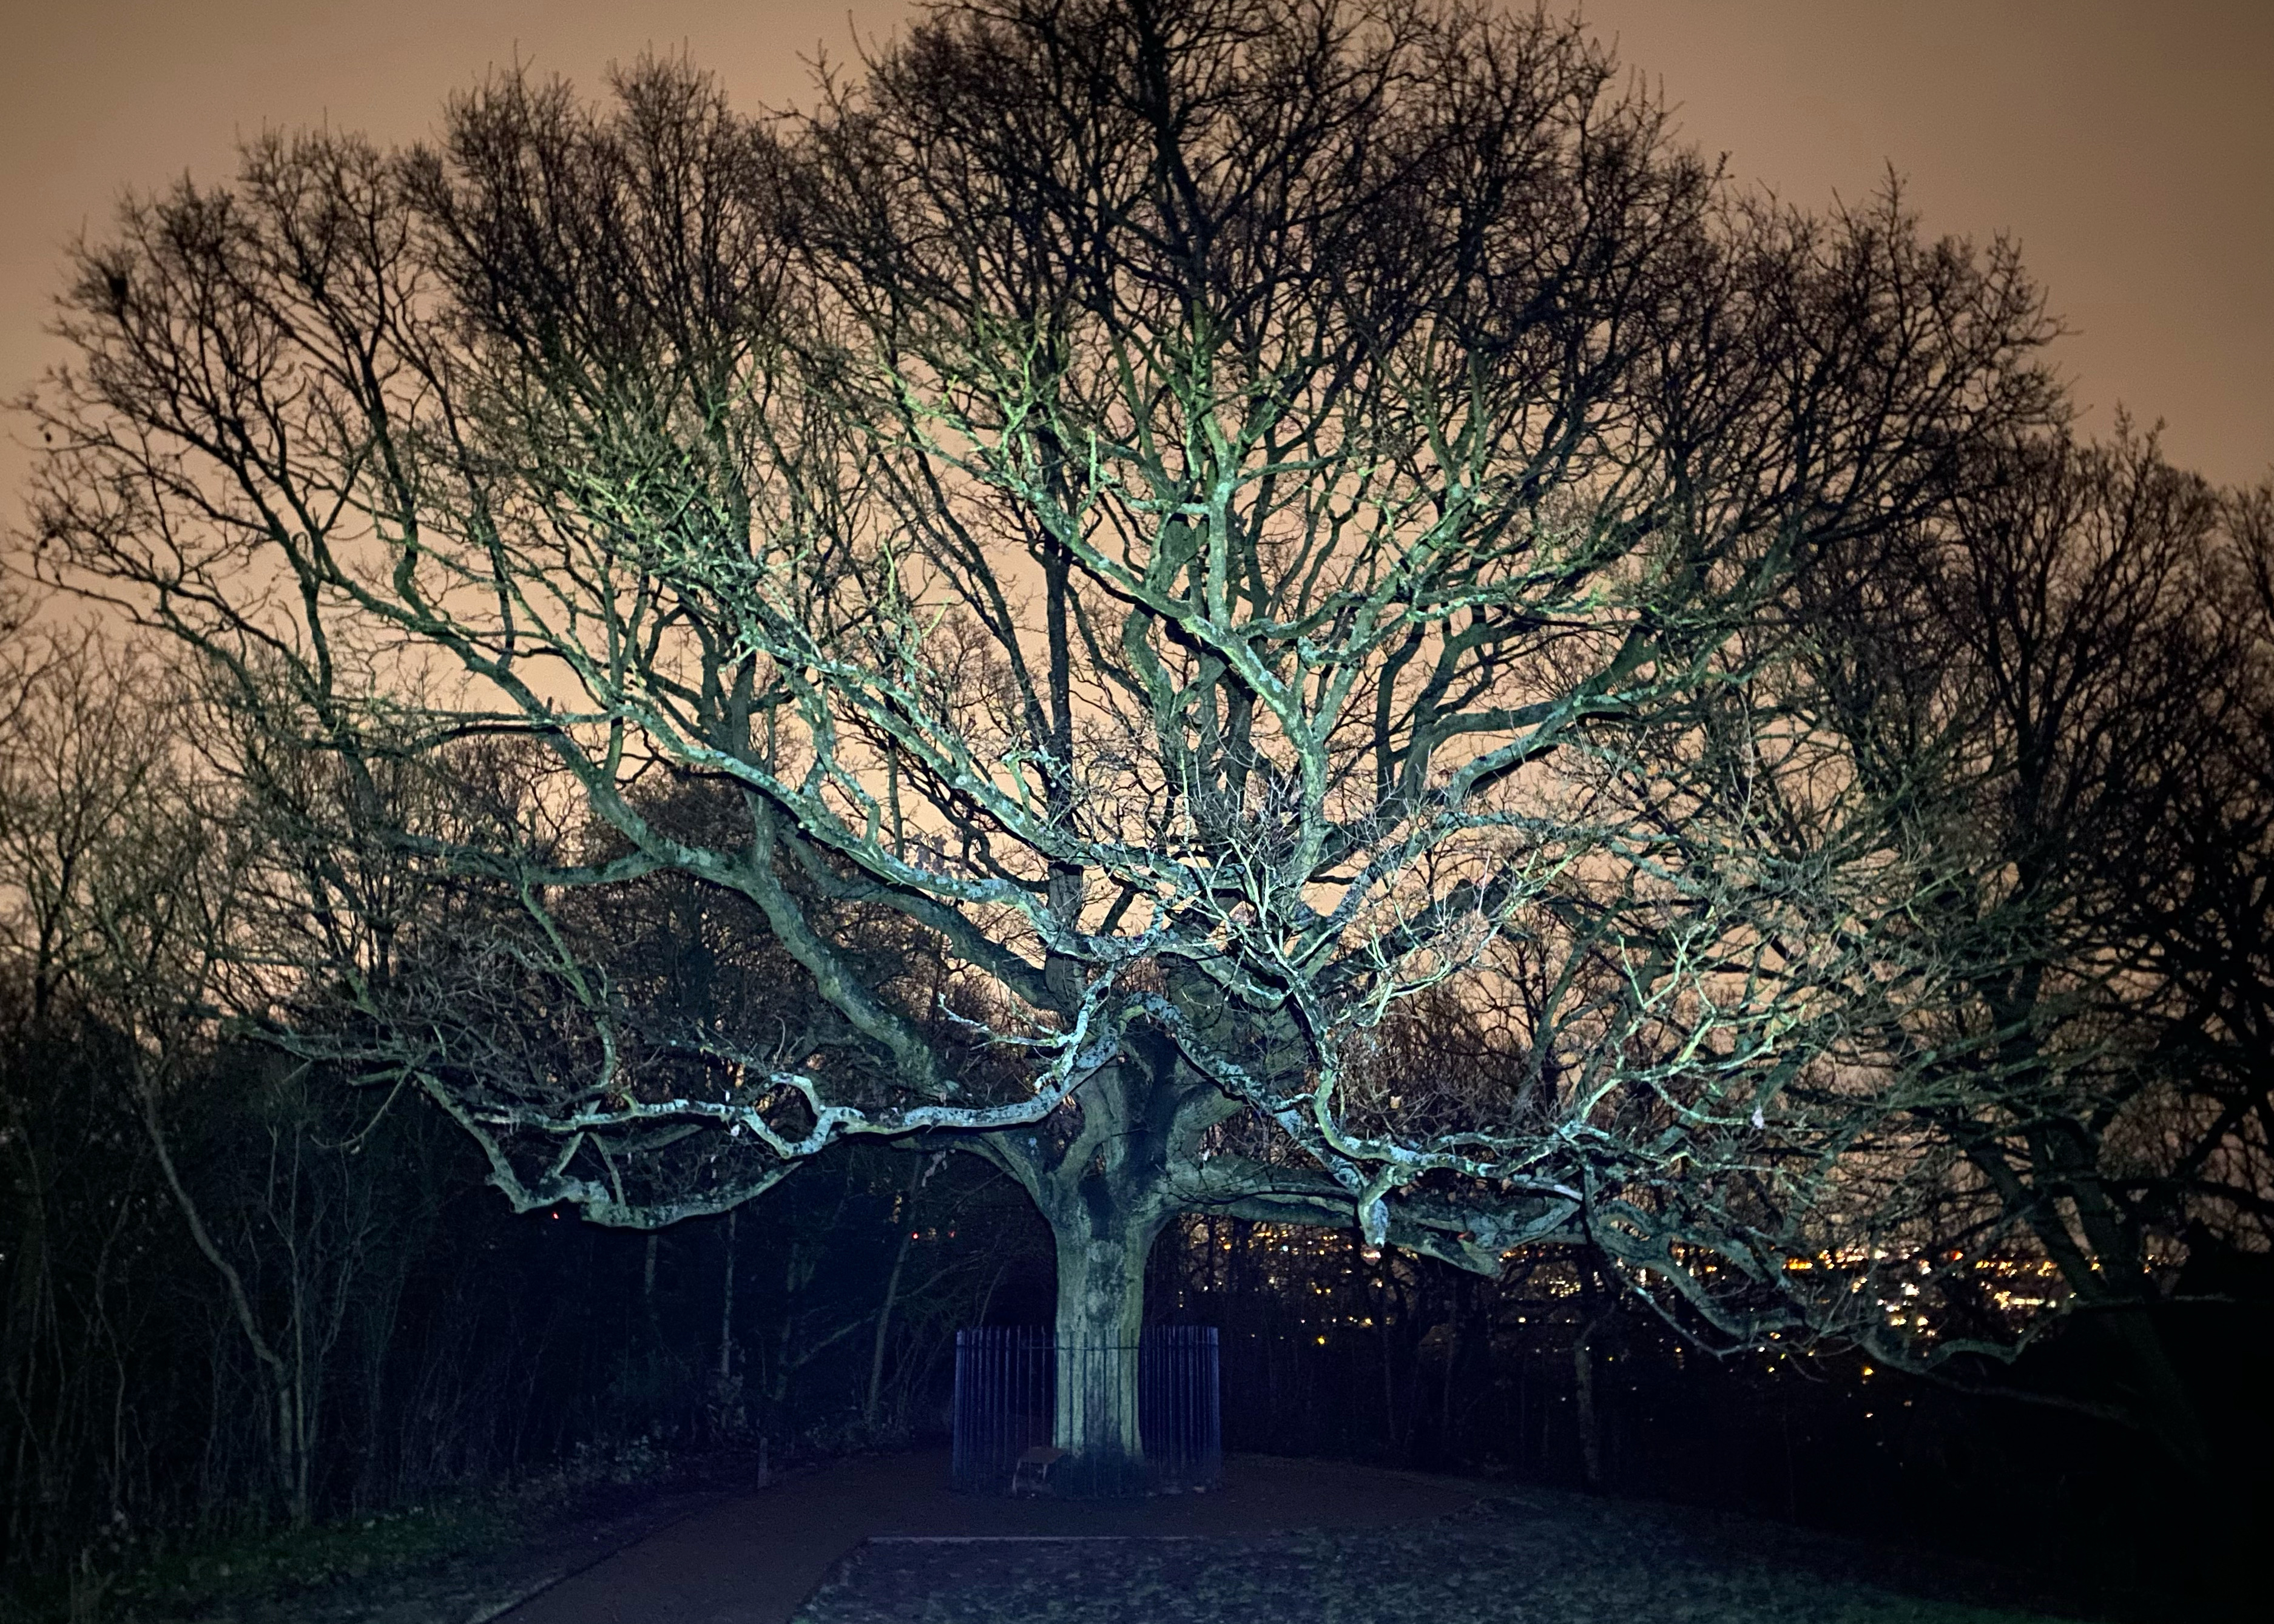 View of the tree at night, no leaves on any of the branches